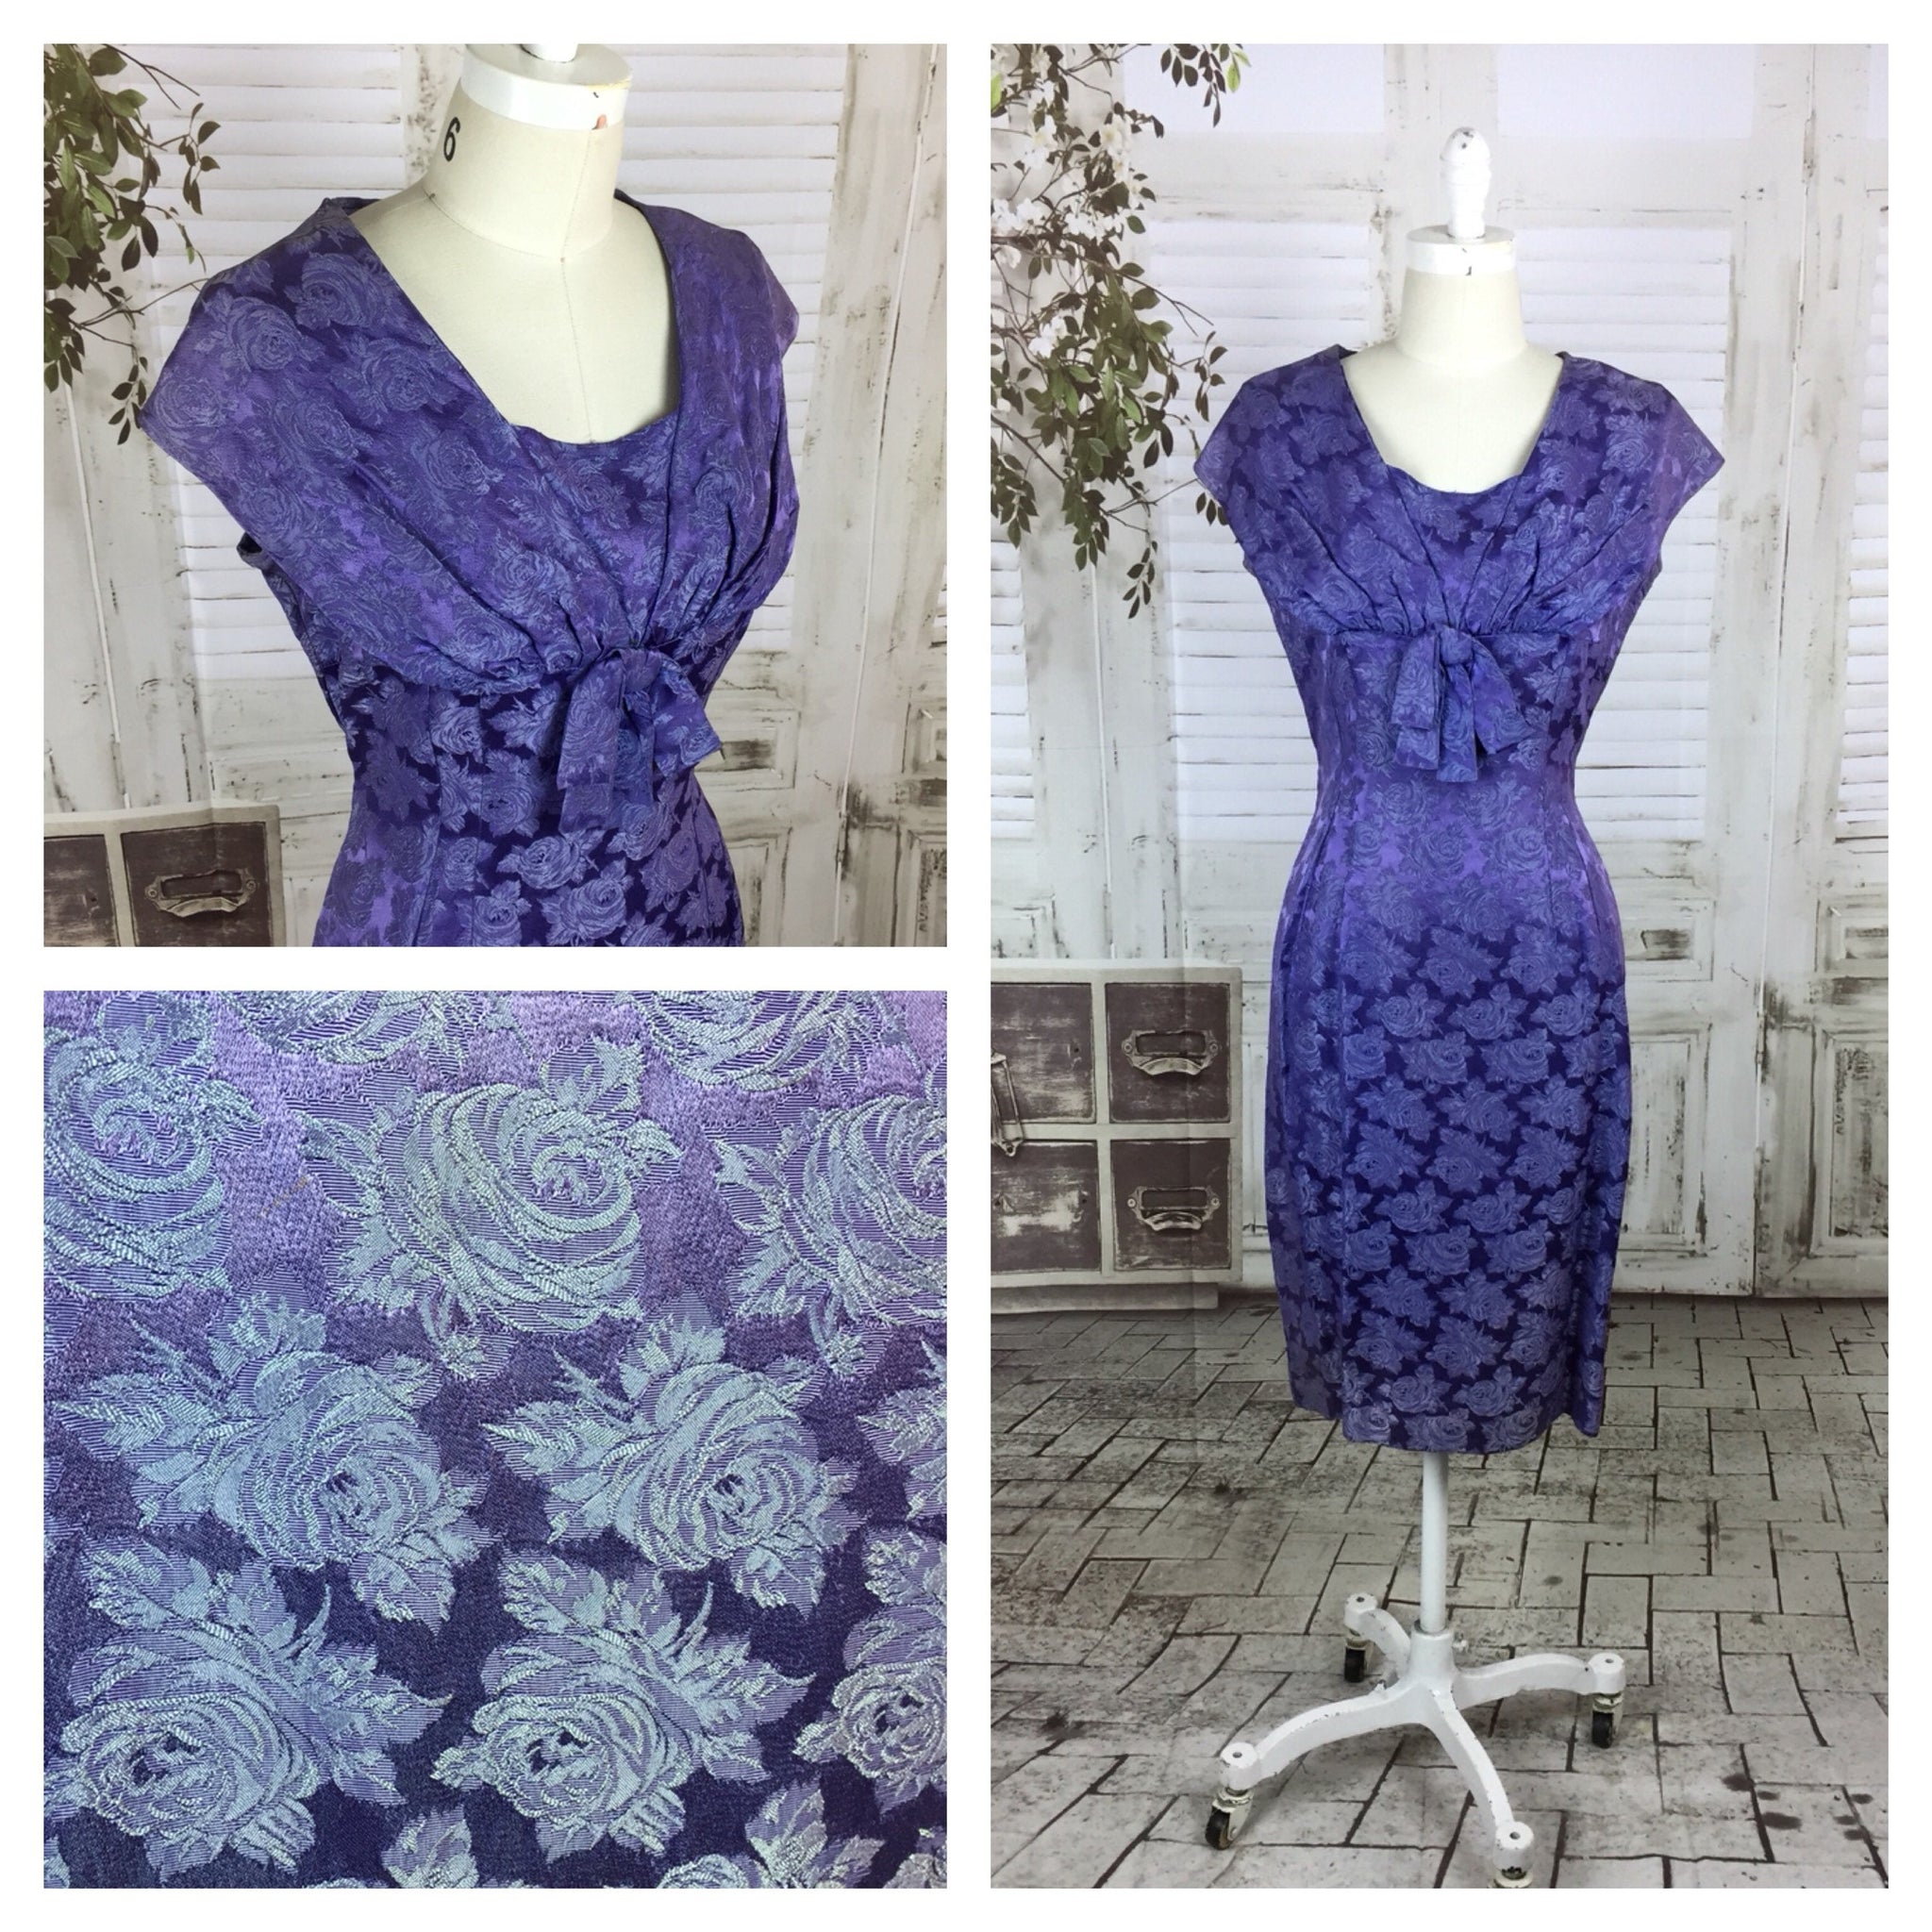 Original 1950s 50s Vintage Purple Wriggle Dress With Rose Decoration - more pictures